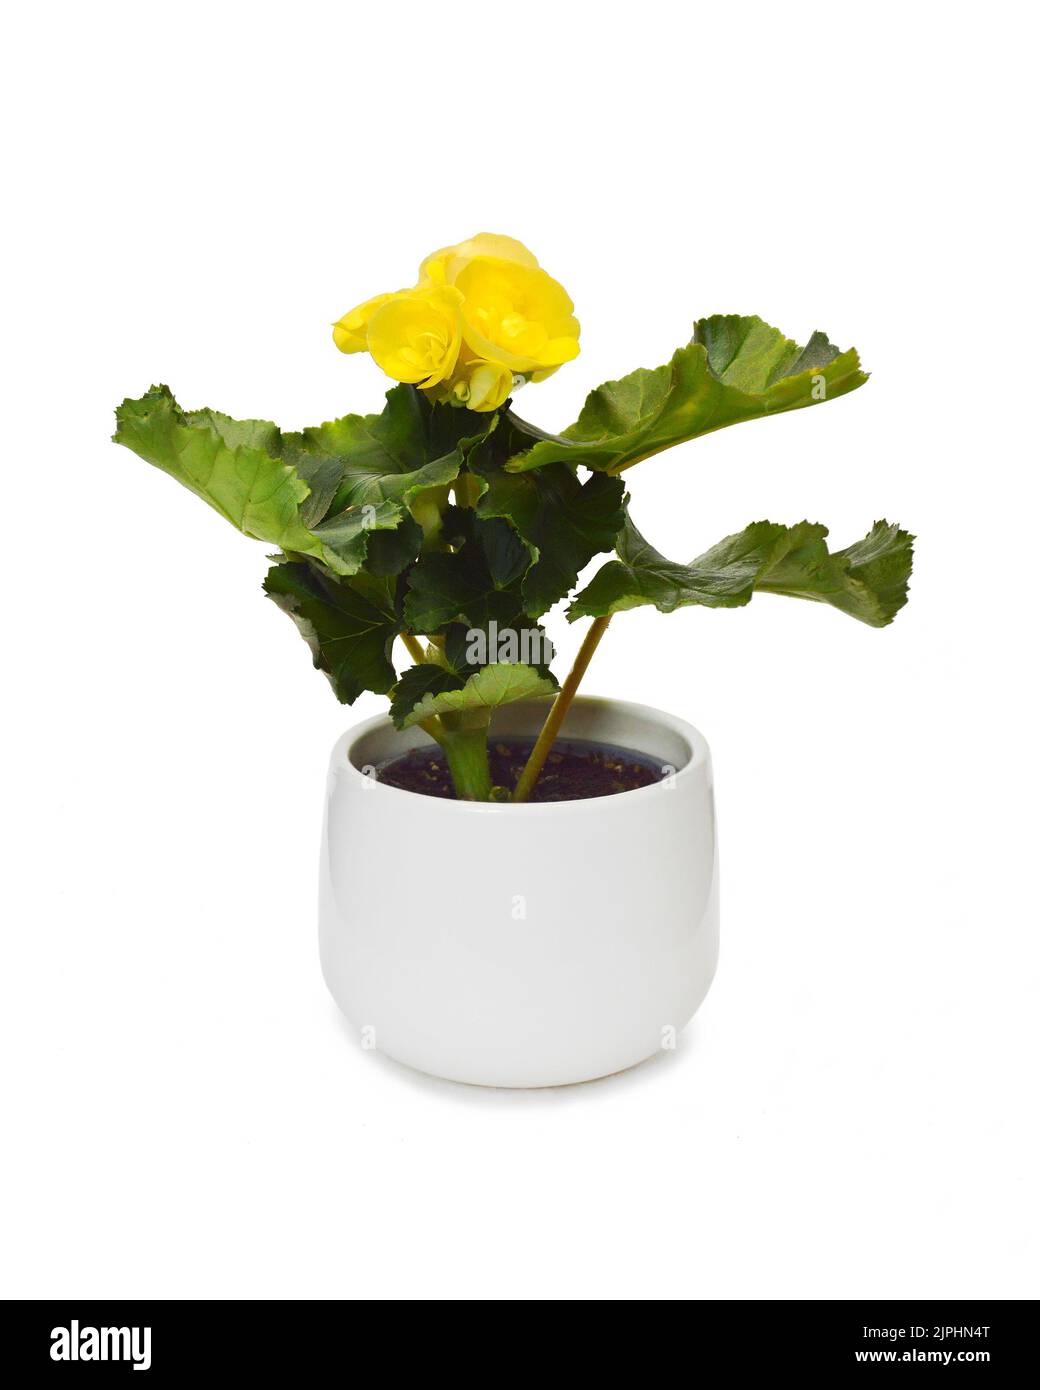 Yellow begonia plant in flowerpot isolated on white background Stock Photo